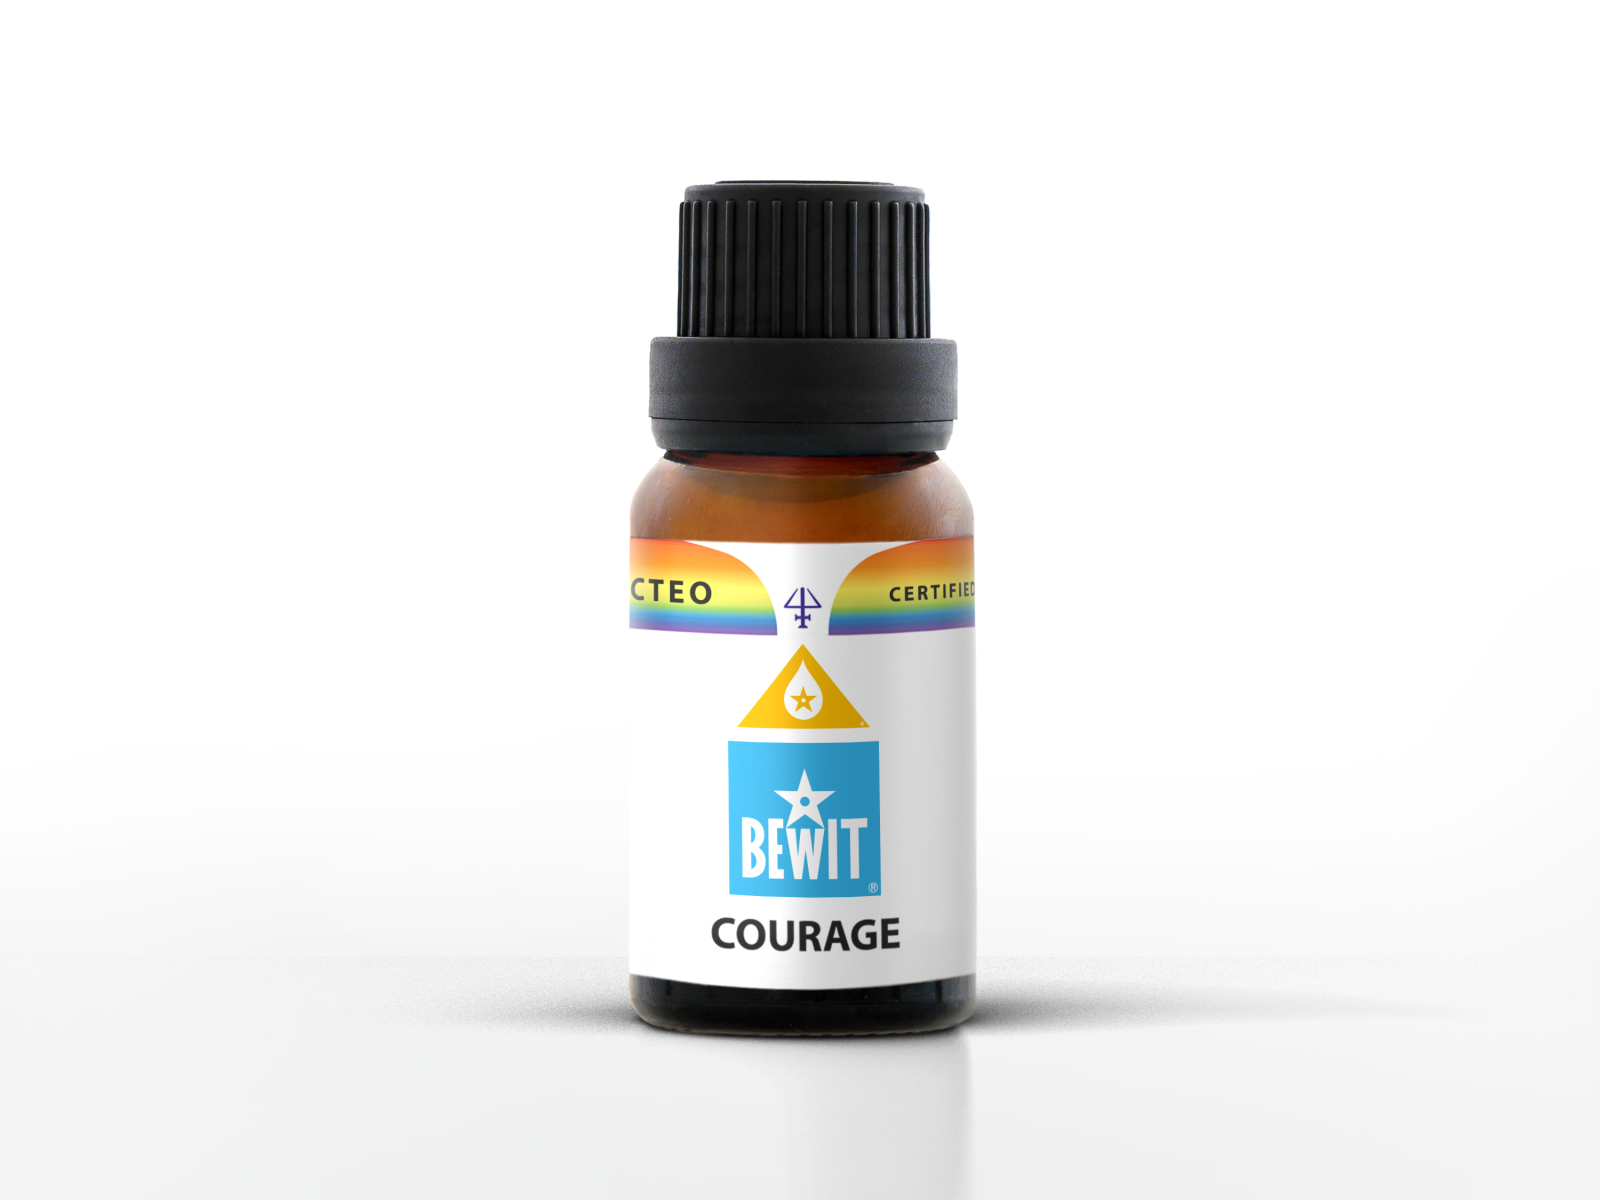 BEWIT COURAGE - Blend of essential oils